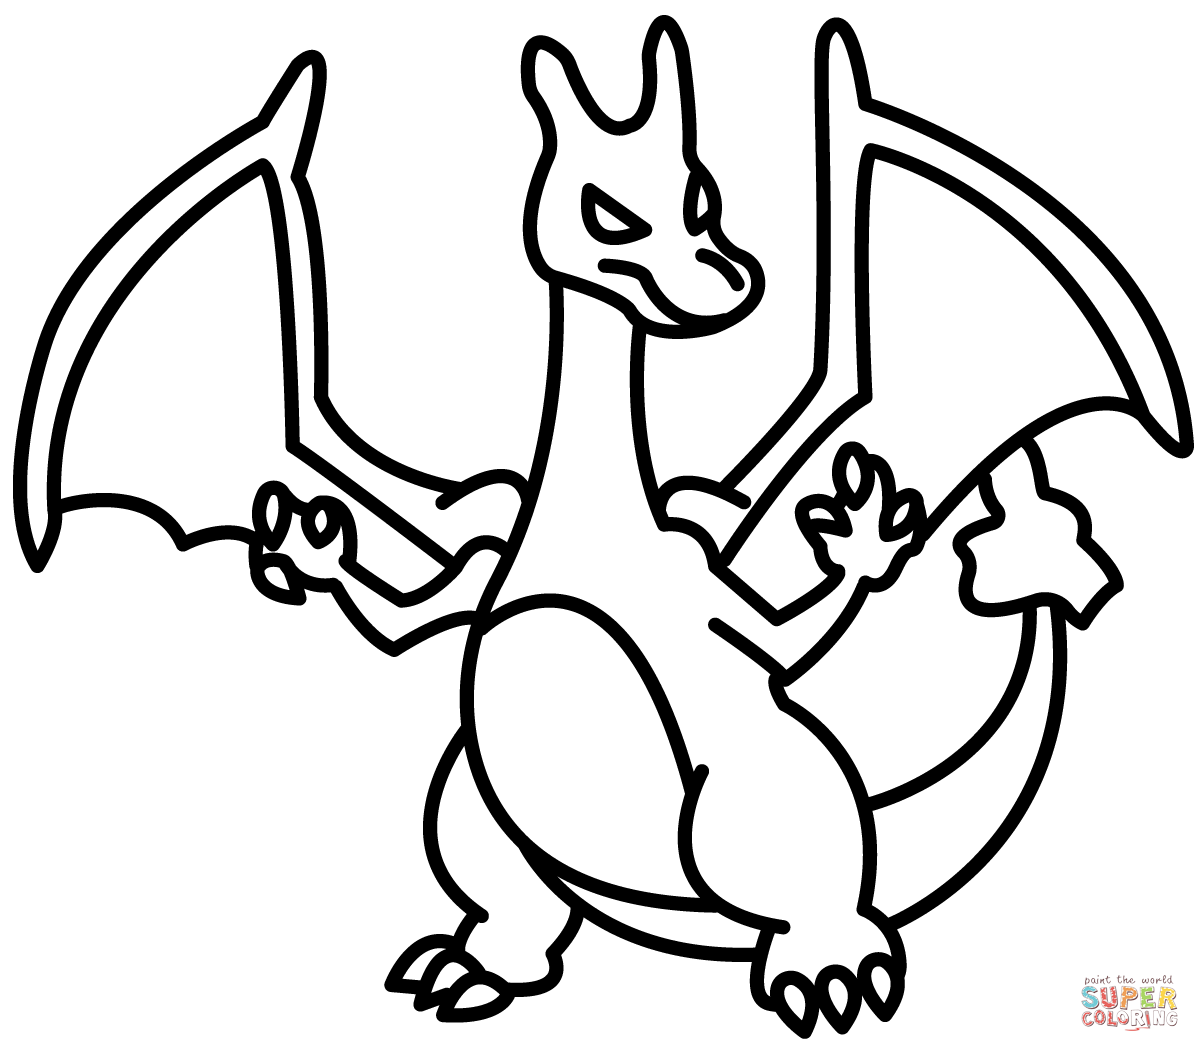 Chibi charizard coloring page free printable coloring pages